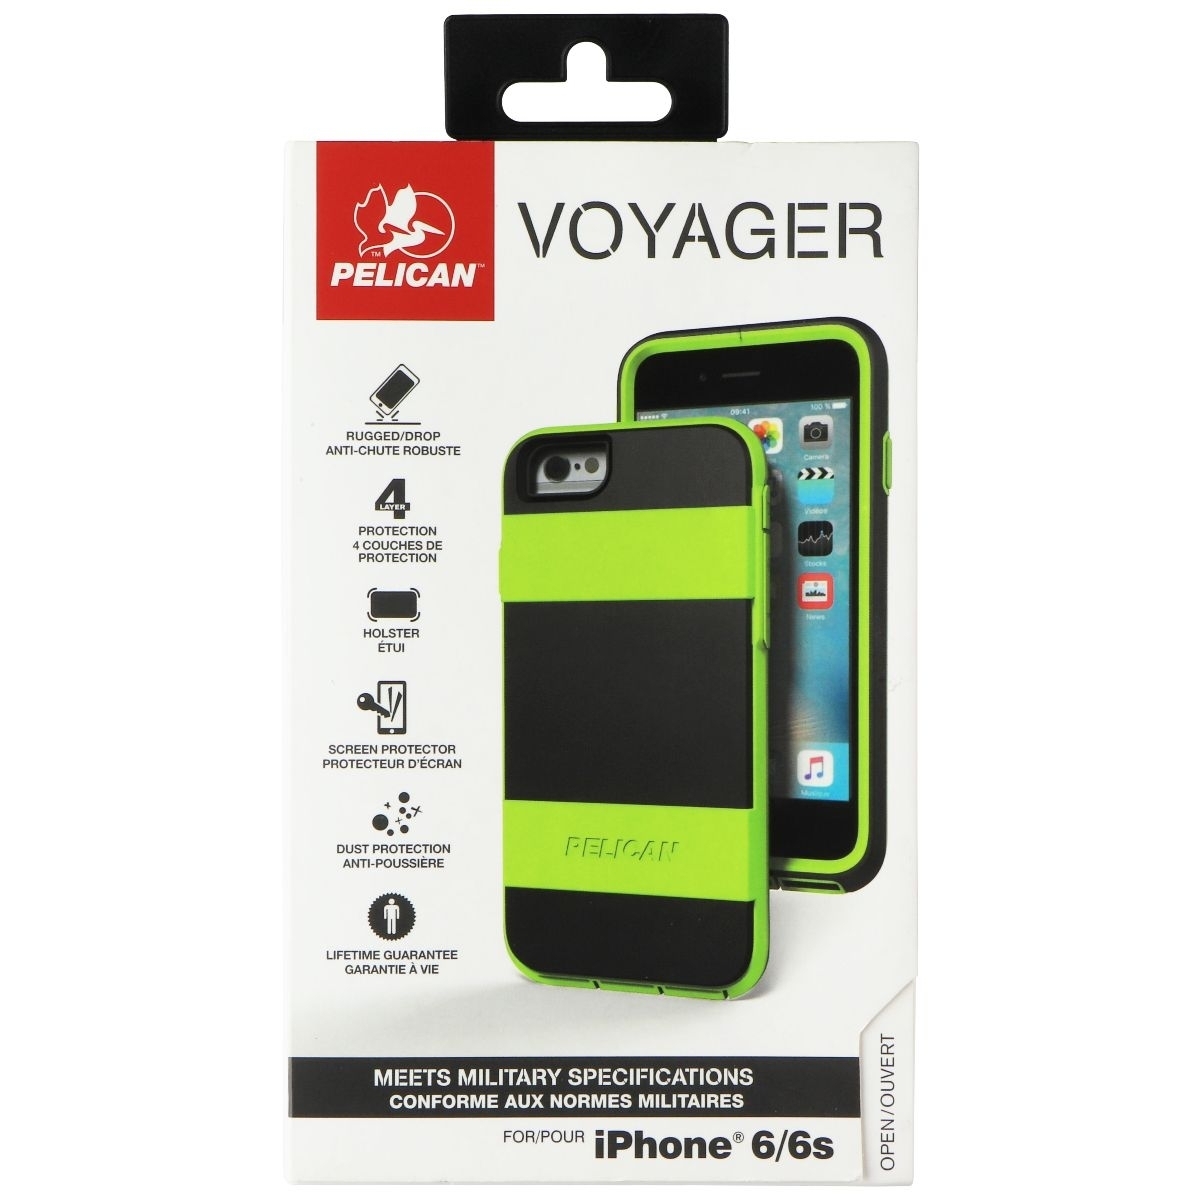 Pelican Voyager Series Case And Holster For IPhone 6/6s - Gray/Neon Green (Refurbished)